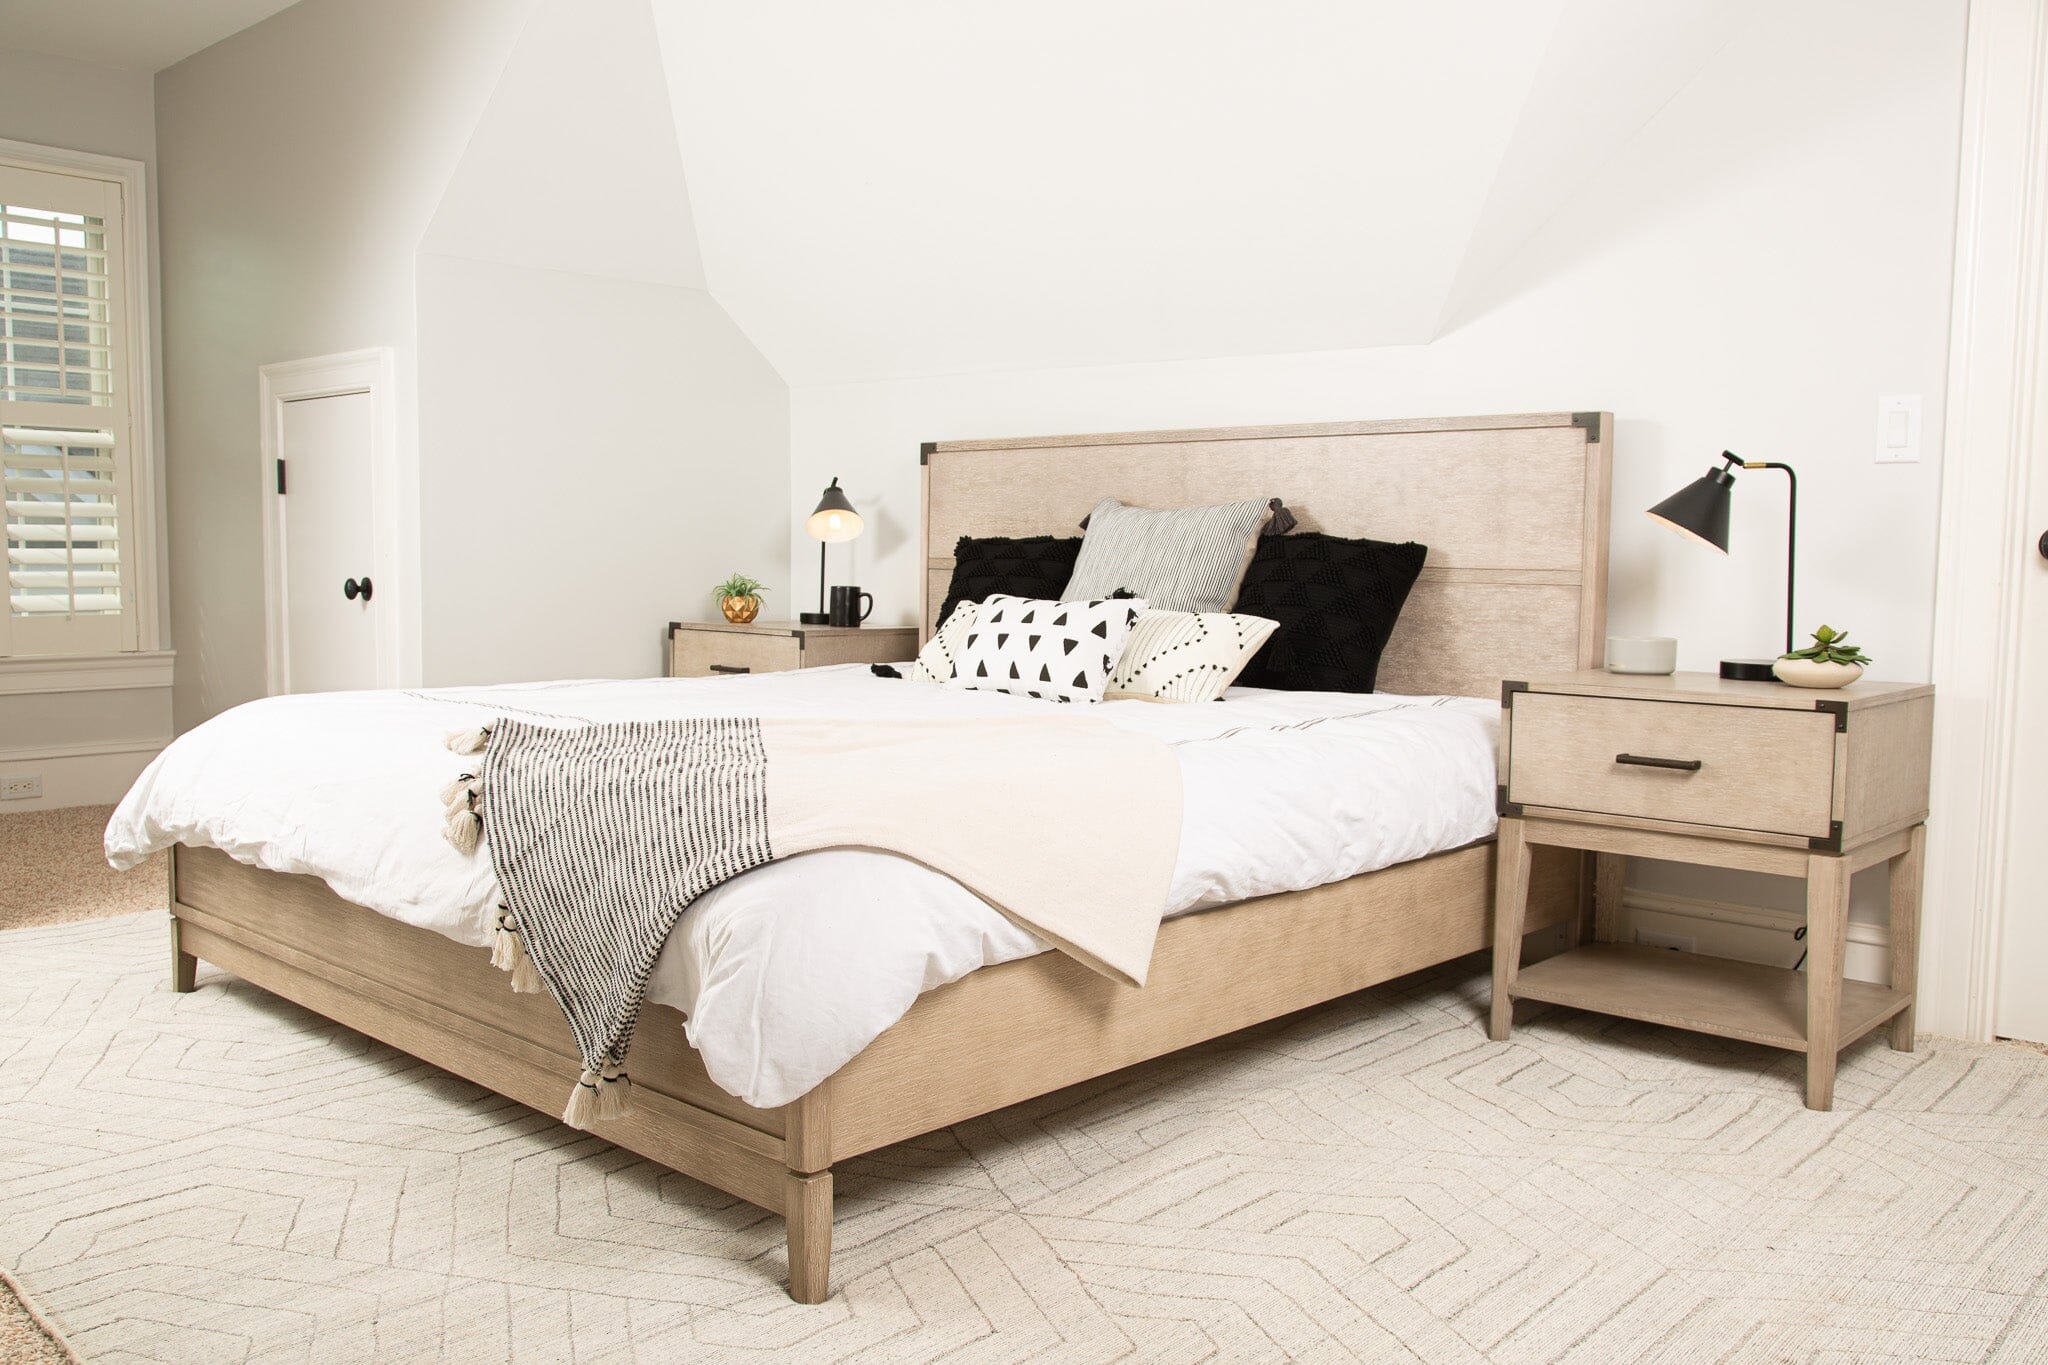 Solid Wood Beds: Why Wood Bed Frames Are Best